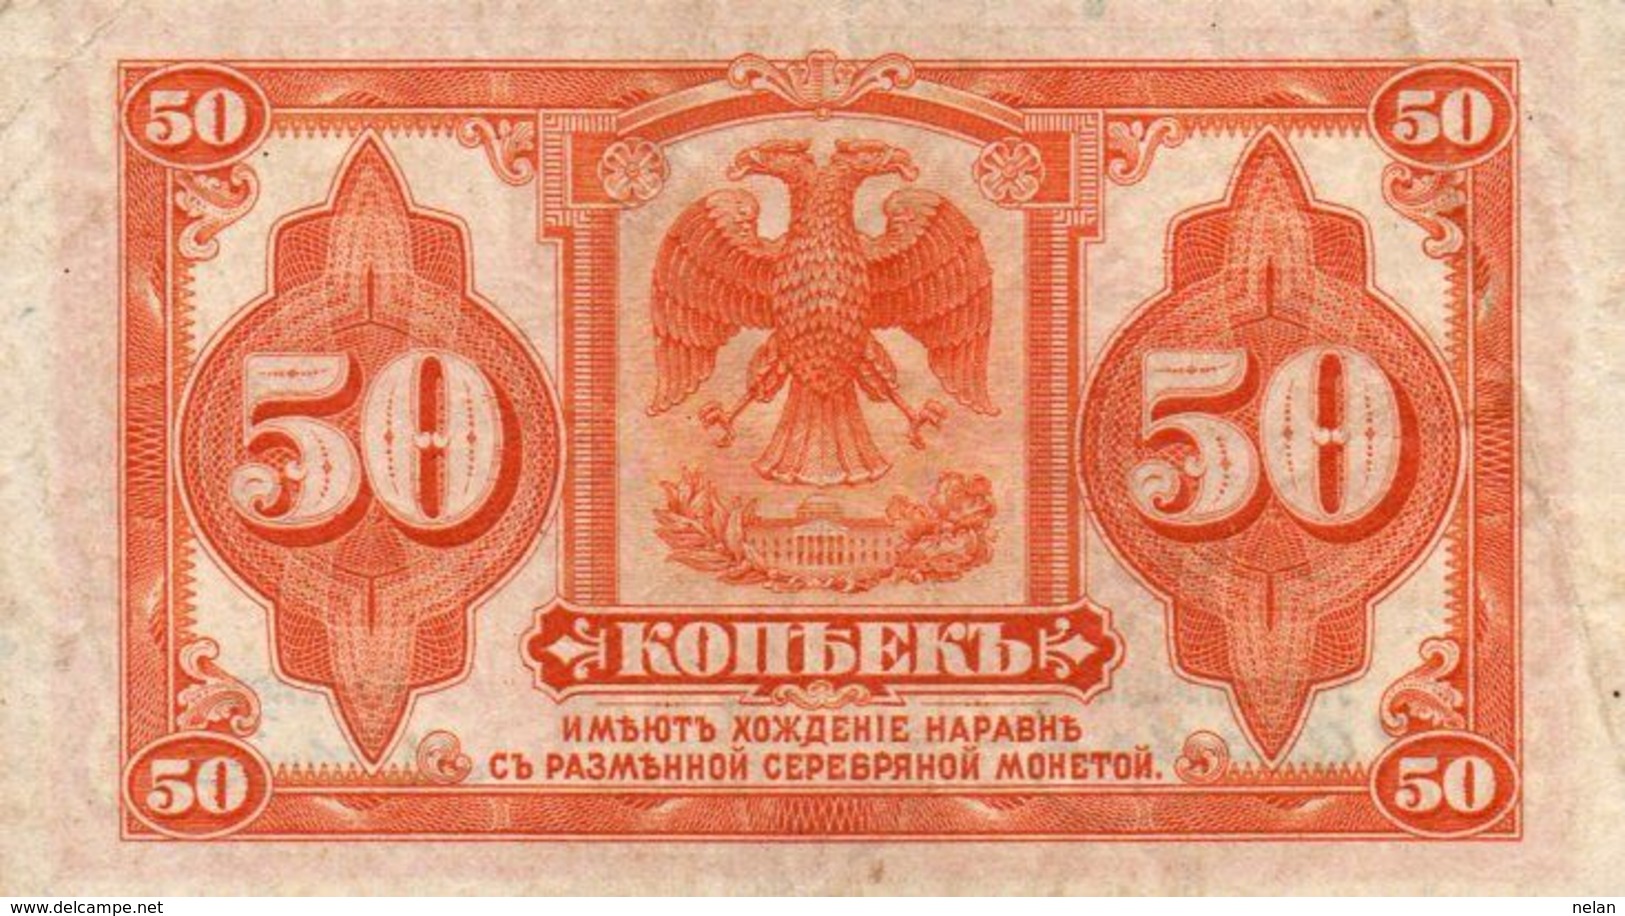 RUSSIA  50 KOPEKS  1919 P-S1244  CIRC XF-- Specialized Issues East Siberia- Far East Provisional Government. - Russia